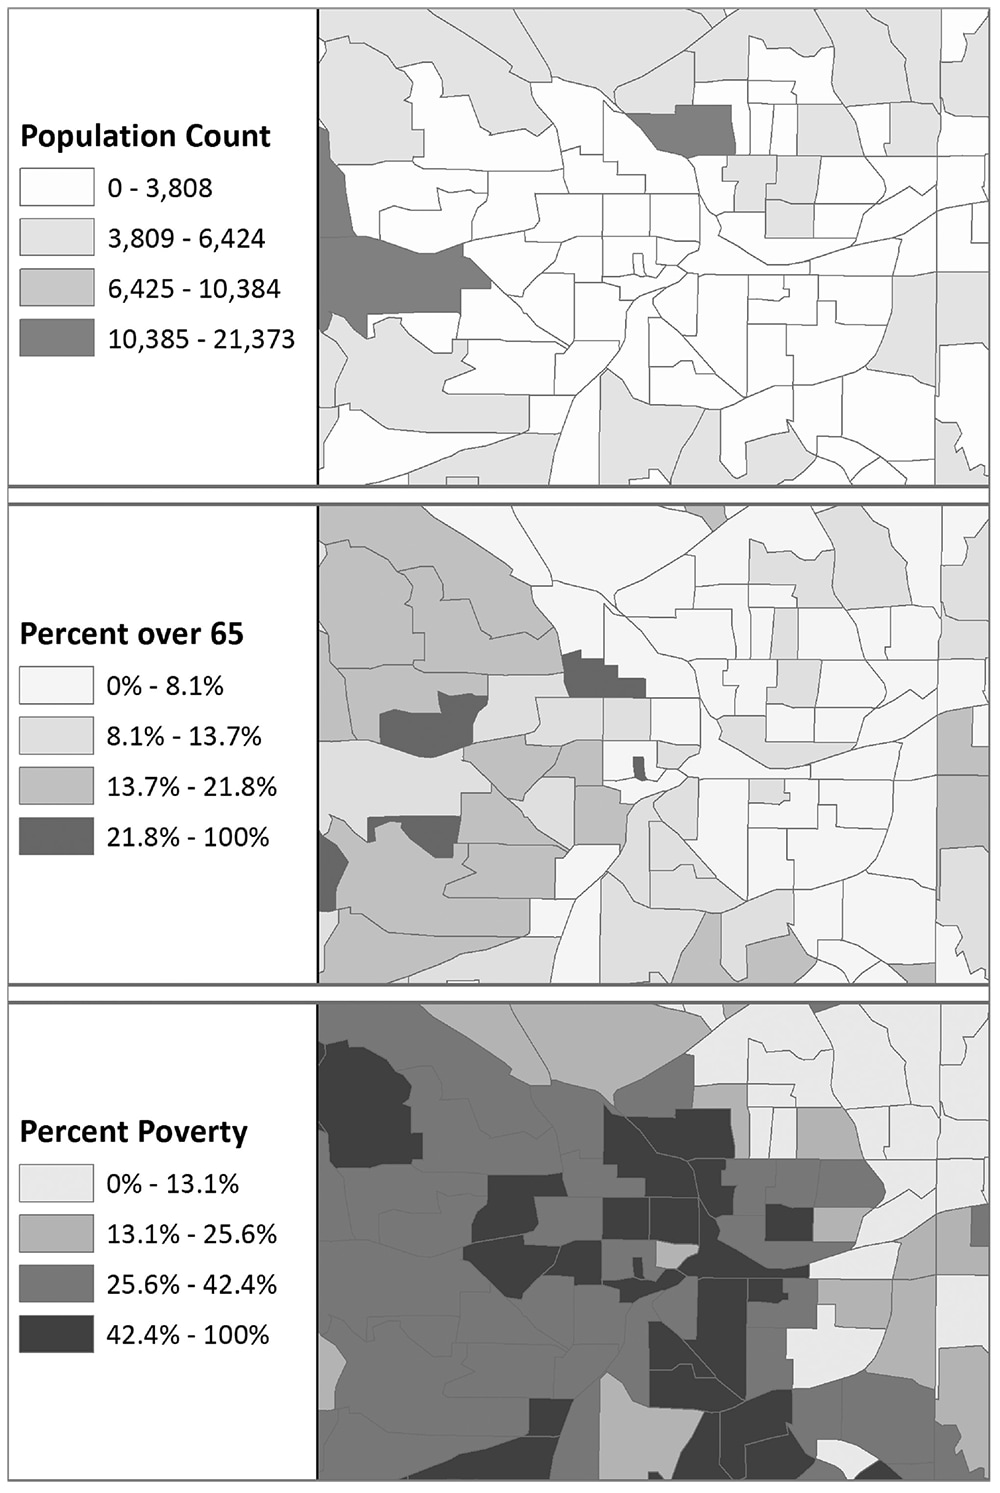 Determining populations and population characteristics. Geographic information system methods provide the means for determining population estimates within specific geographic areas for populations of particular interest. In these maps, population count, percentage of people 65 years old, and percentage of people in poverty based on 2014 American Community Survey Estimates are shown by census tract.